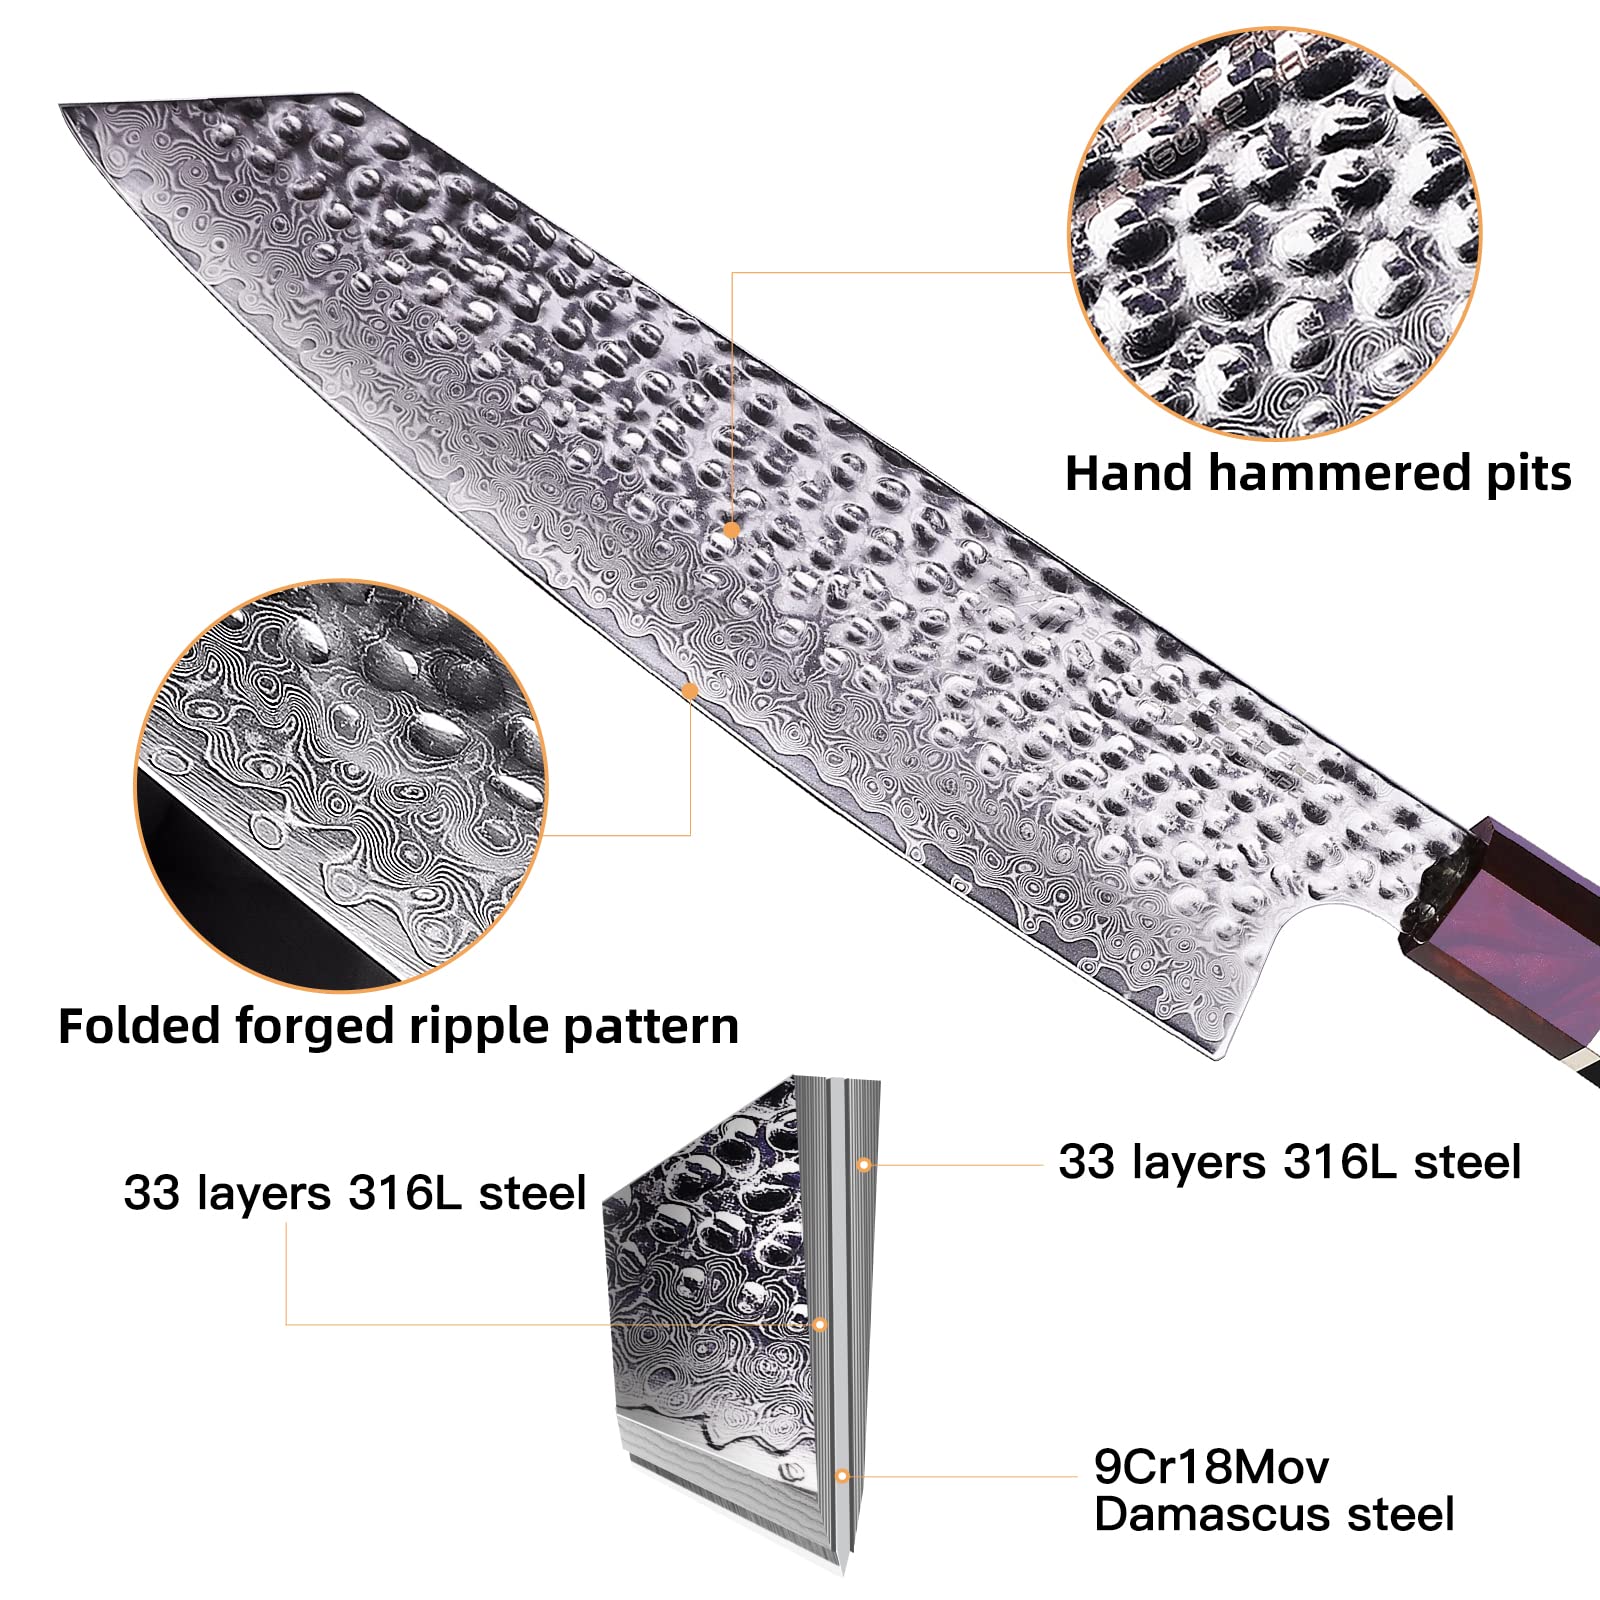 FINDKING Eternity Series Japanese Kiritsuke Knife with ABS sheath, Multi-Purpose Gyuto Chef knife, 9Cr18MoV Damascus Steel Blade, Resin Octagonal Handle, for Meat, Fruits, Vegetables,9 Inches